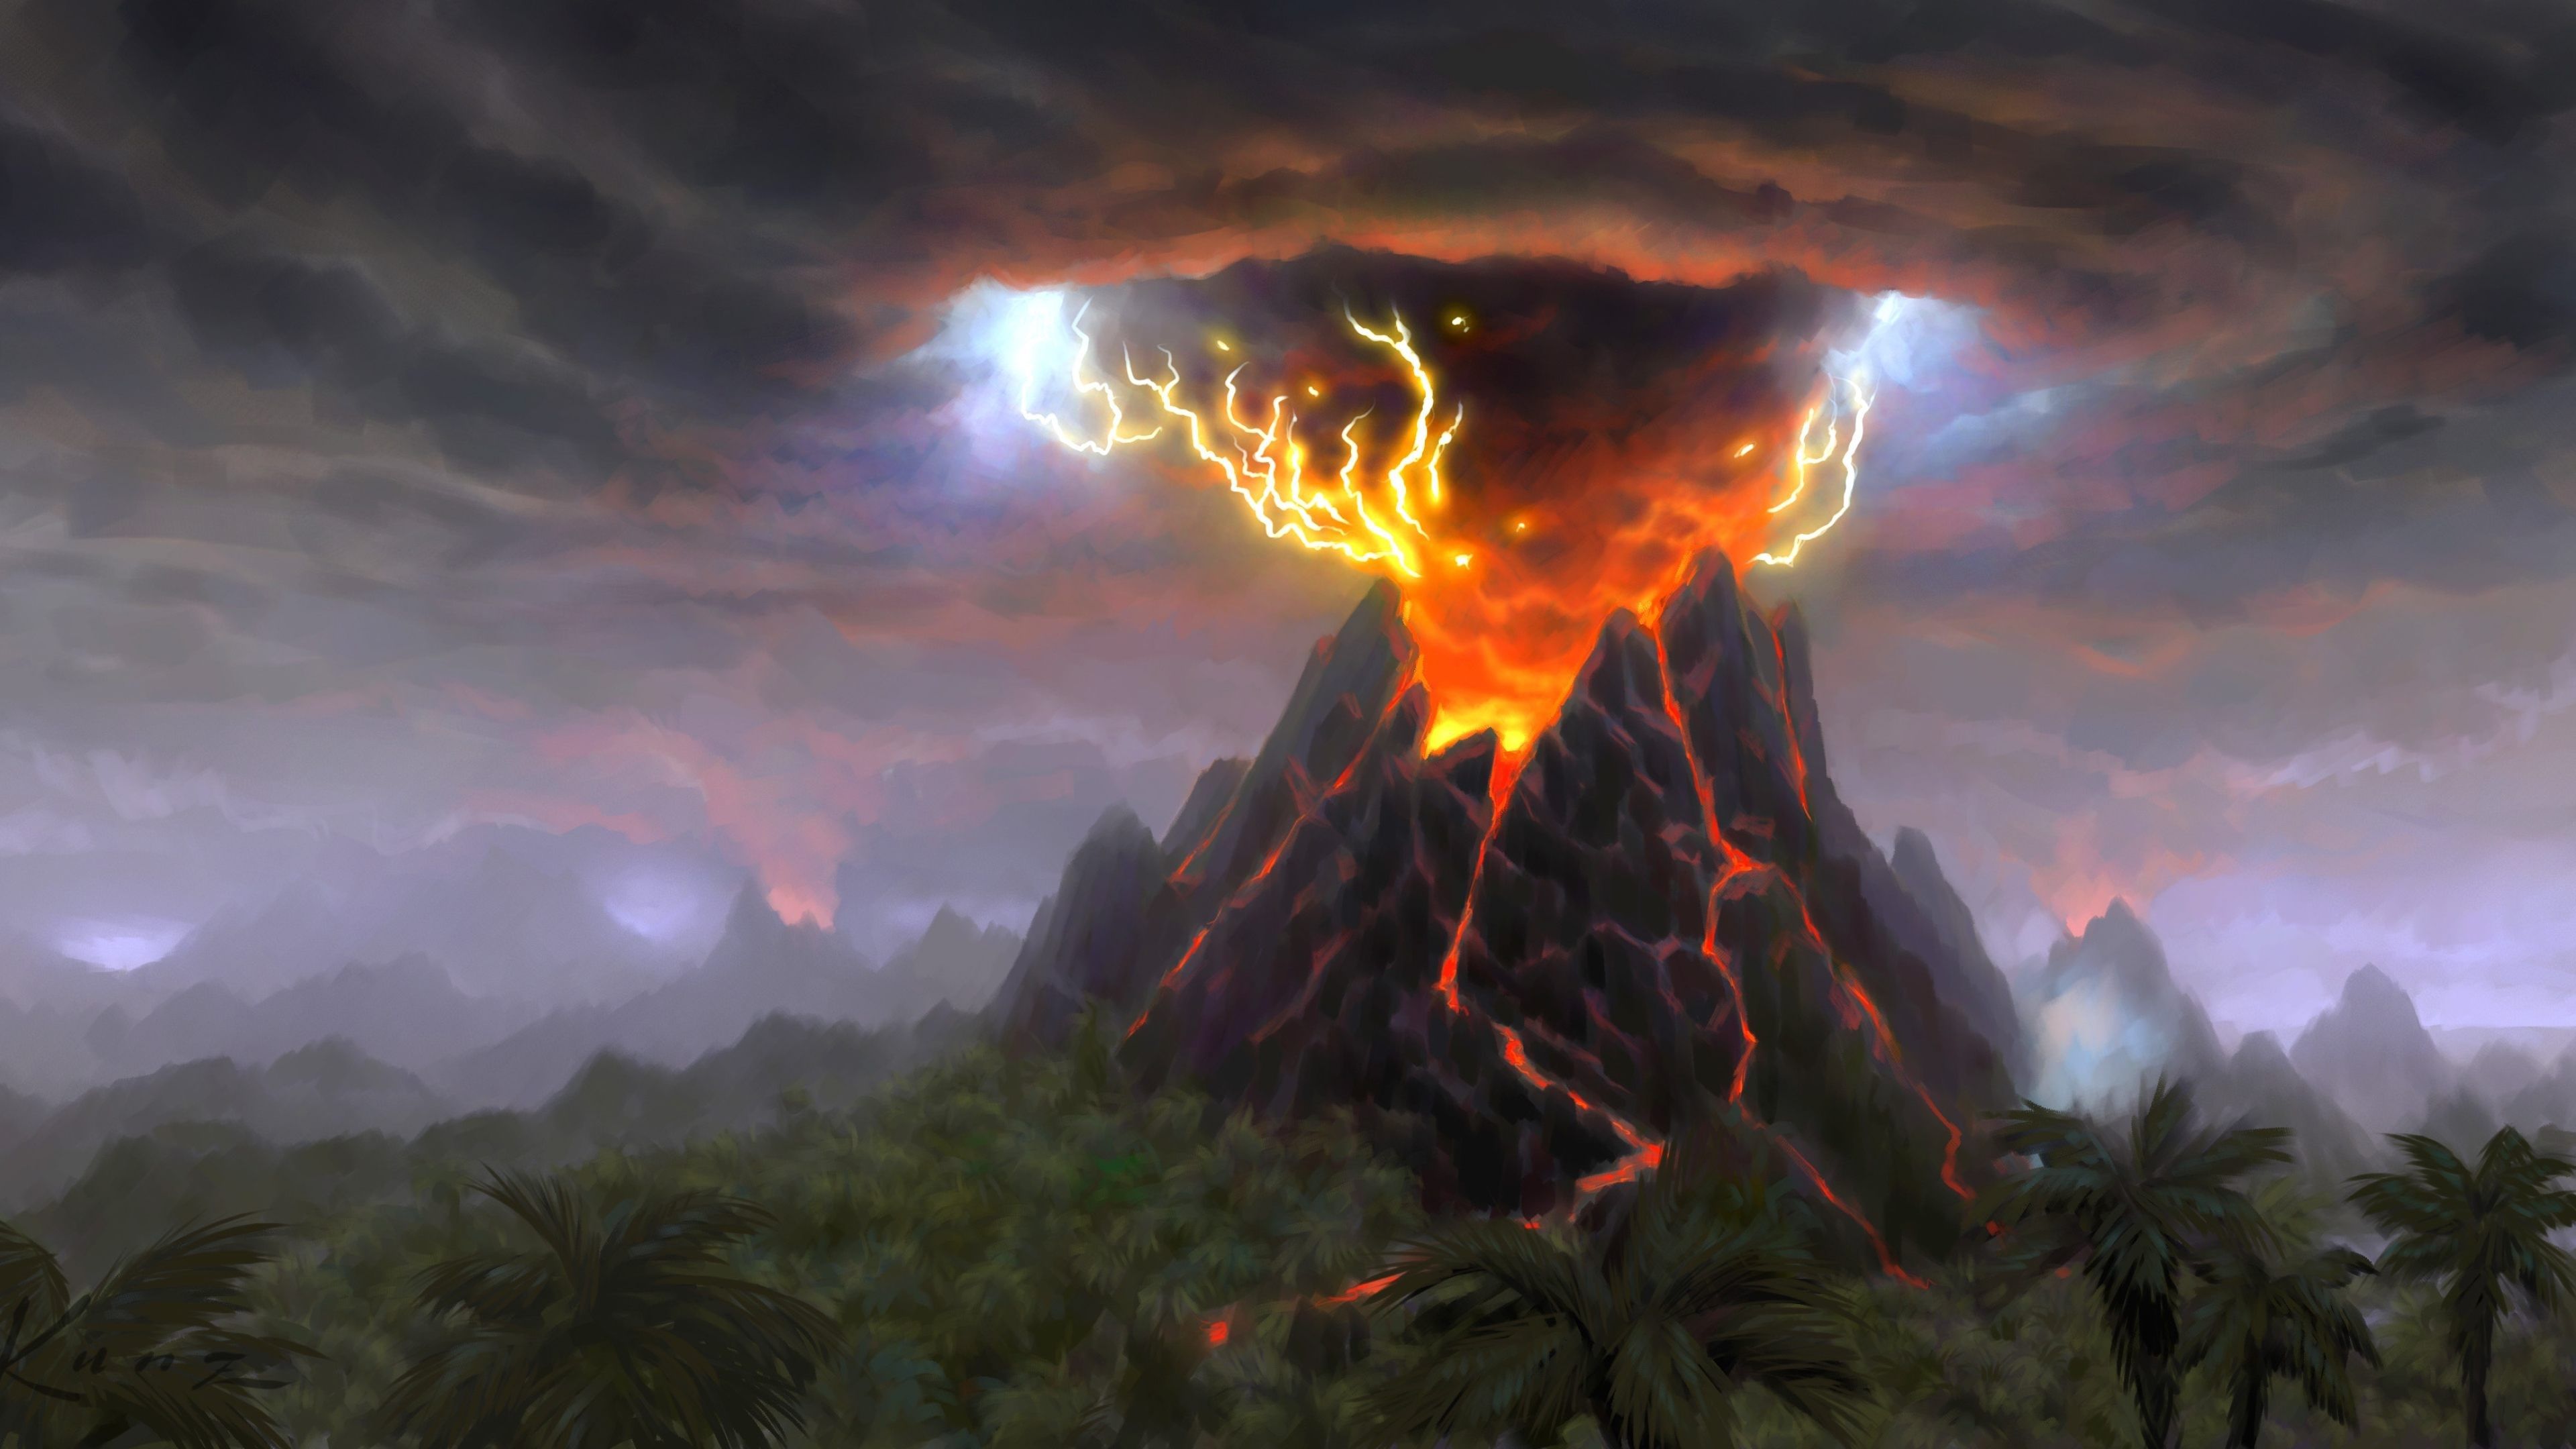 20 4K Volcano Wallpapers  Background Images